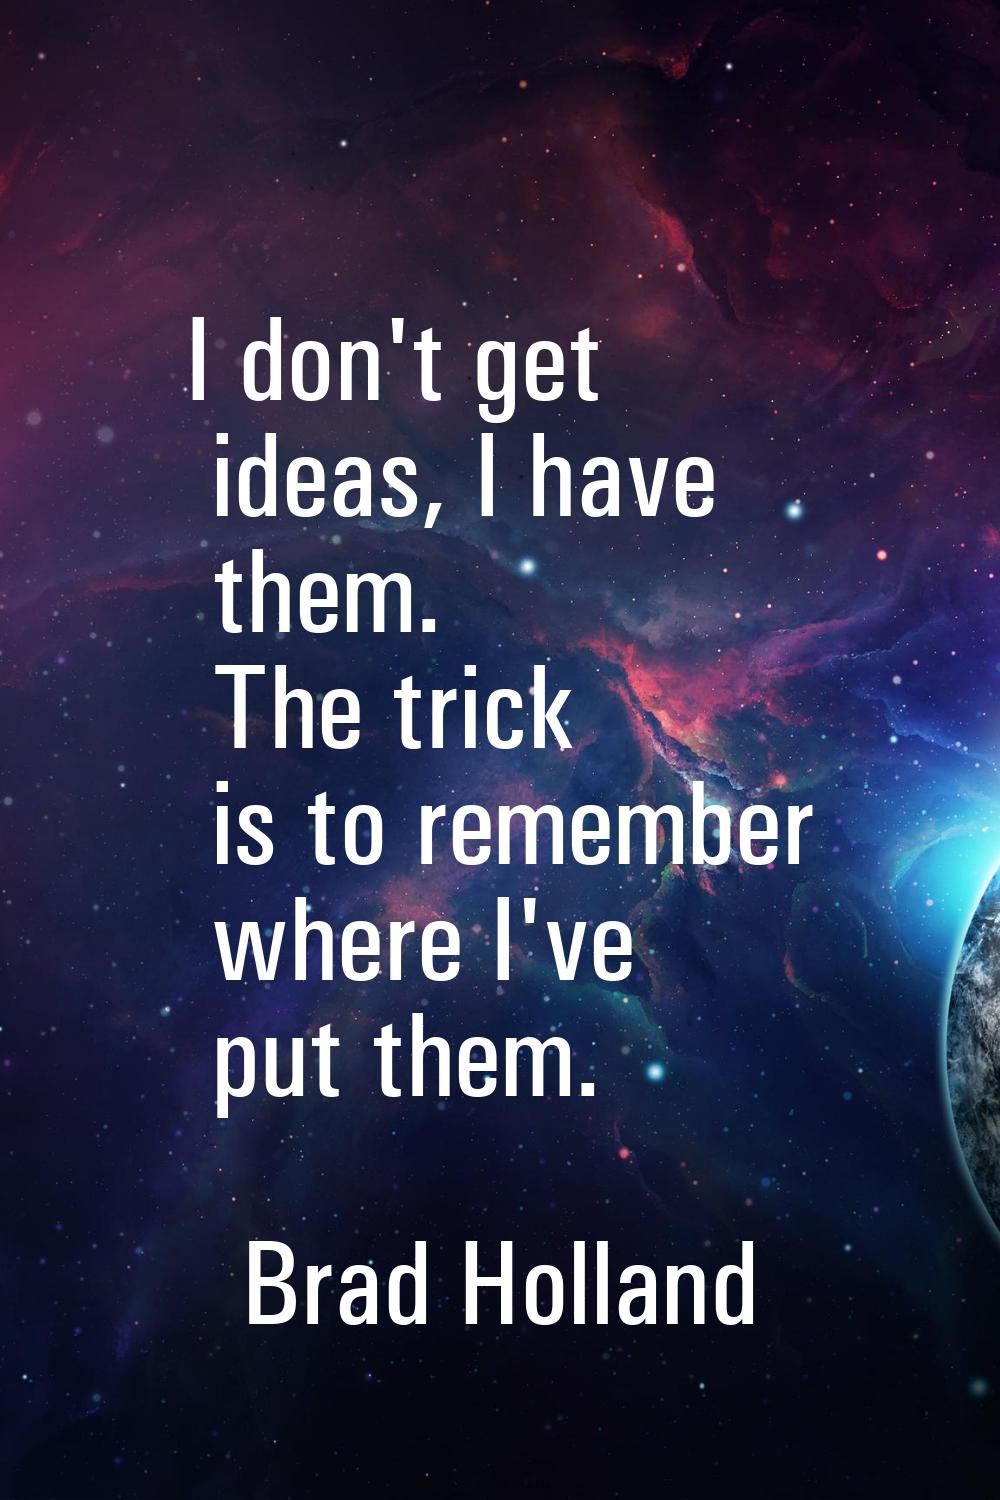 I don't get ideas, I have them. The trick is to remember where I've put them.